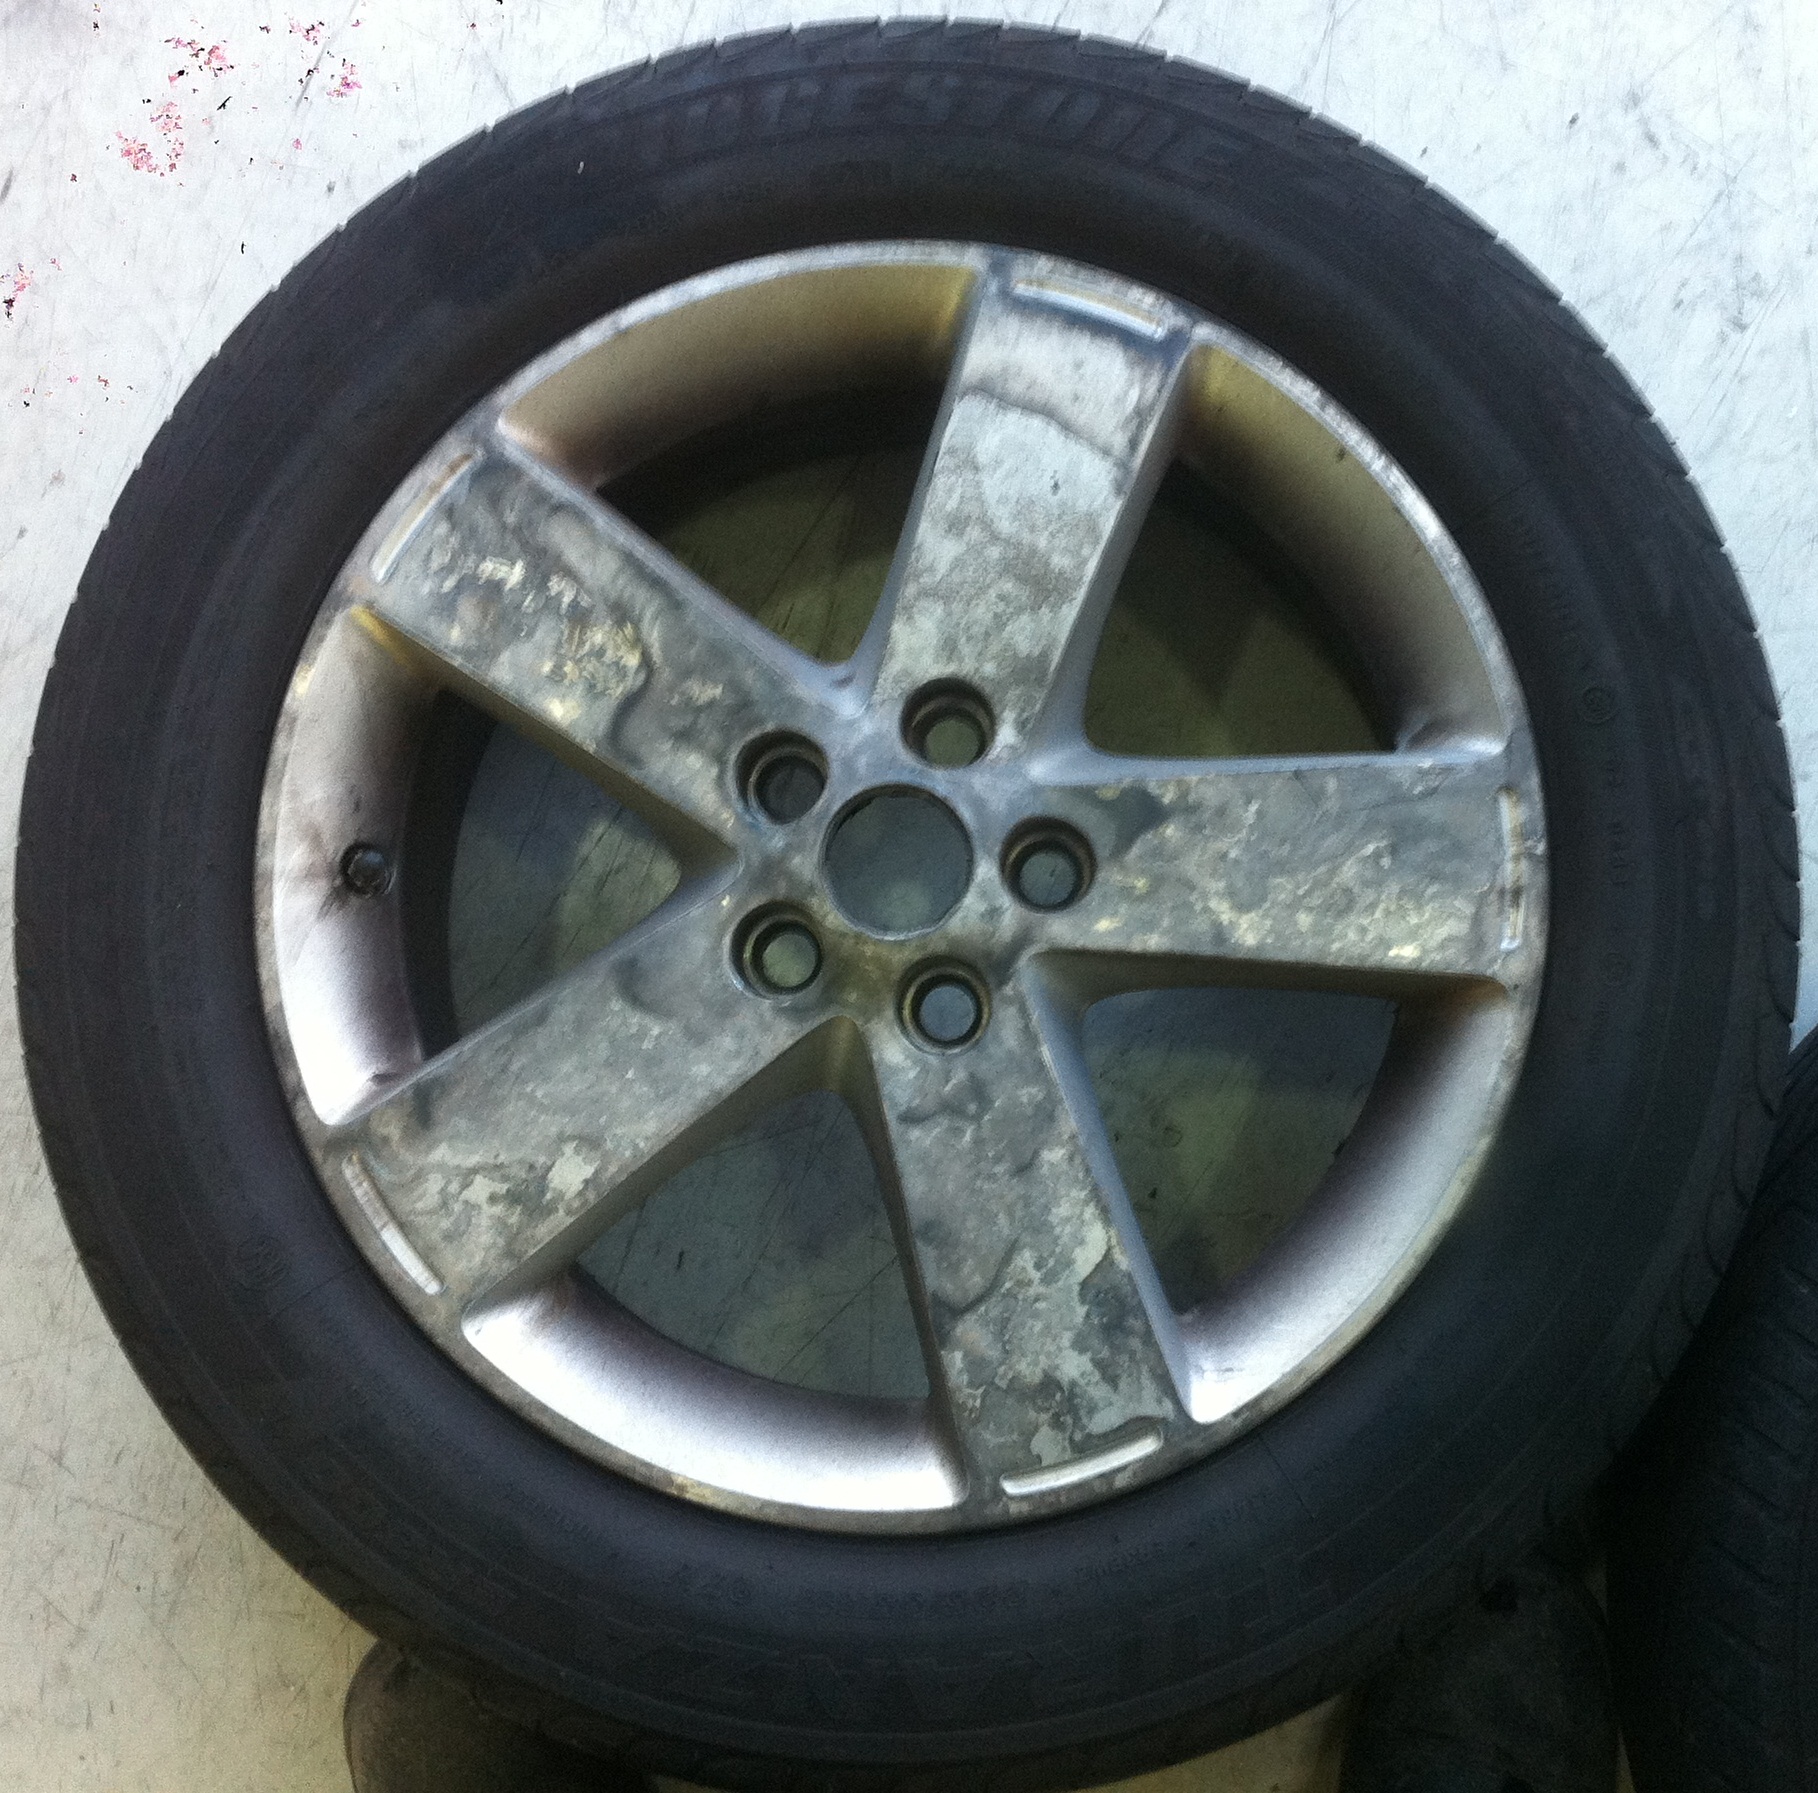 Fix Corroded Alloys Wheels Quickly at Diamond Alloys Diamond Alloys